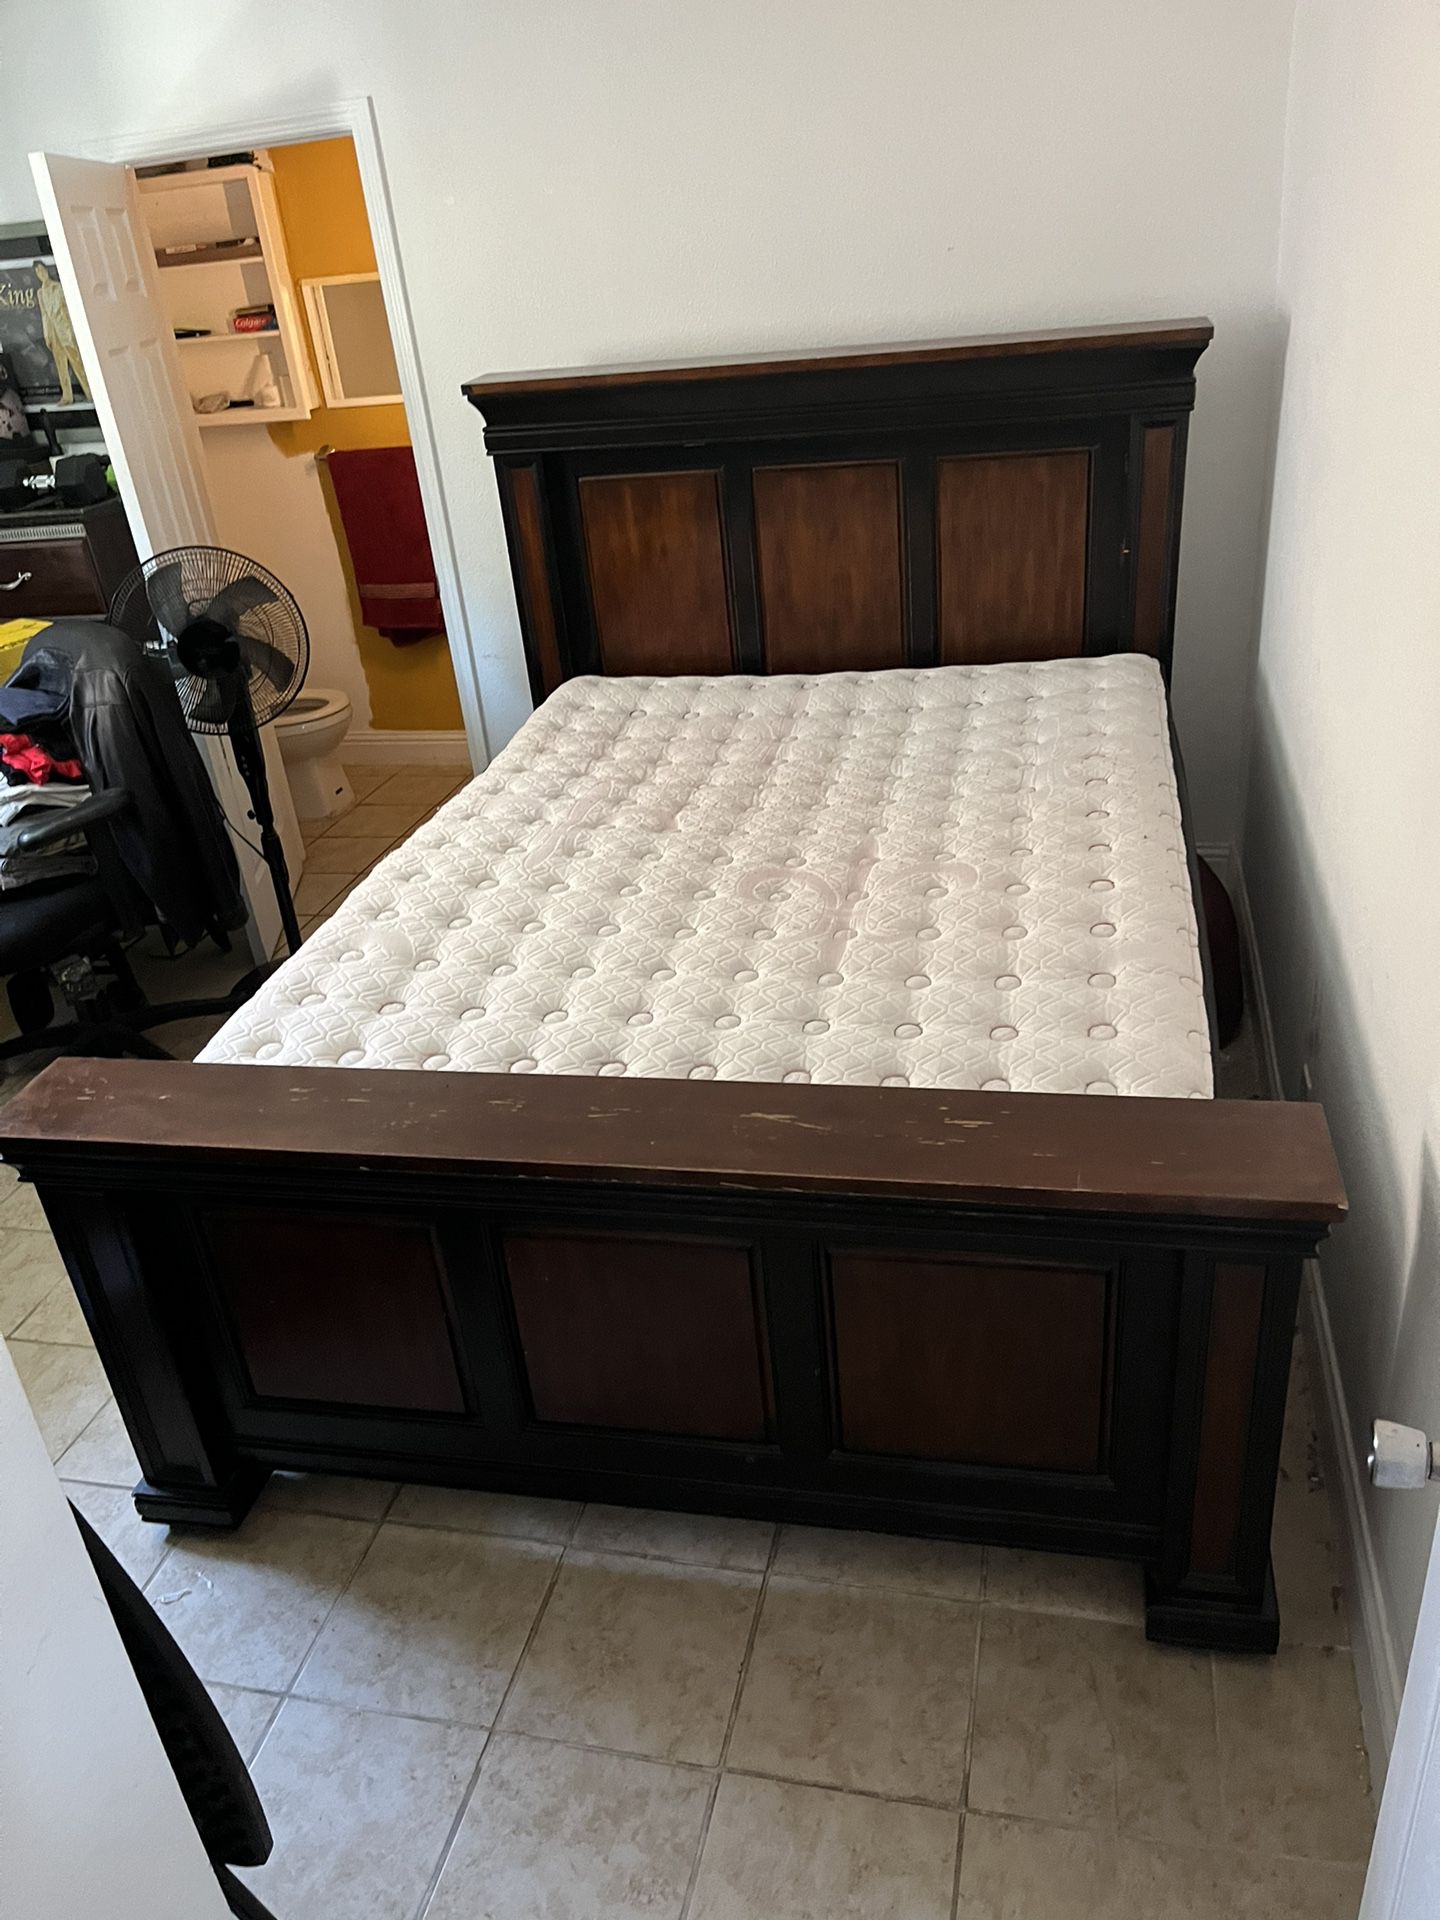 QUALITY QUEEN SIZE BED $125